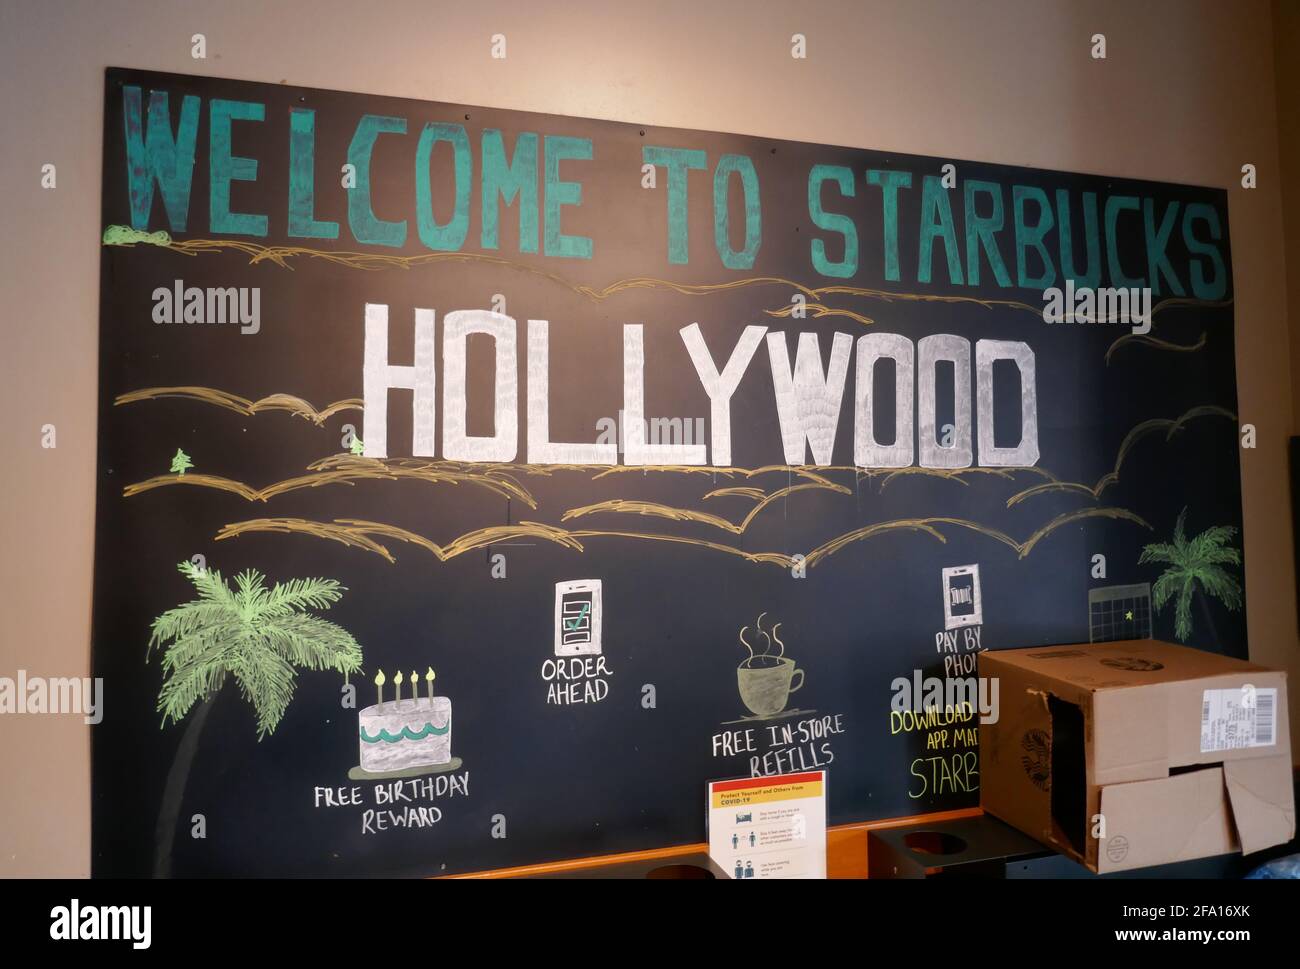 Hollywood, California, USA 17th April 2021 A general view of atmosphere of Starbucks Hollywood Walk of Fame on April 17, 2021 in Hollywood, California, USA. Photo by Barry King/Alamy Stock Photo Stock Photo